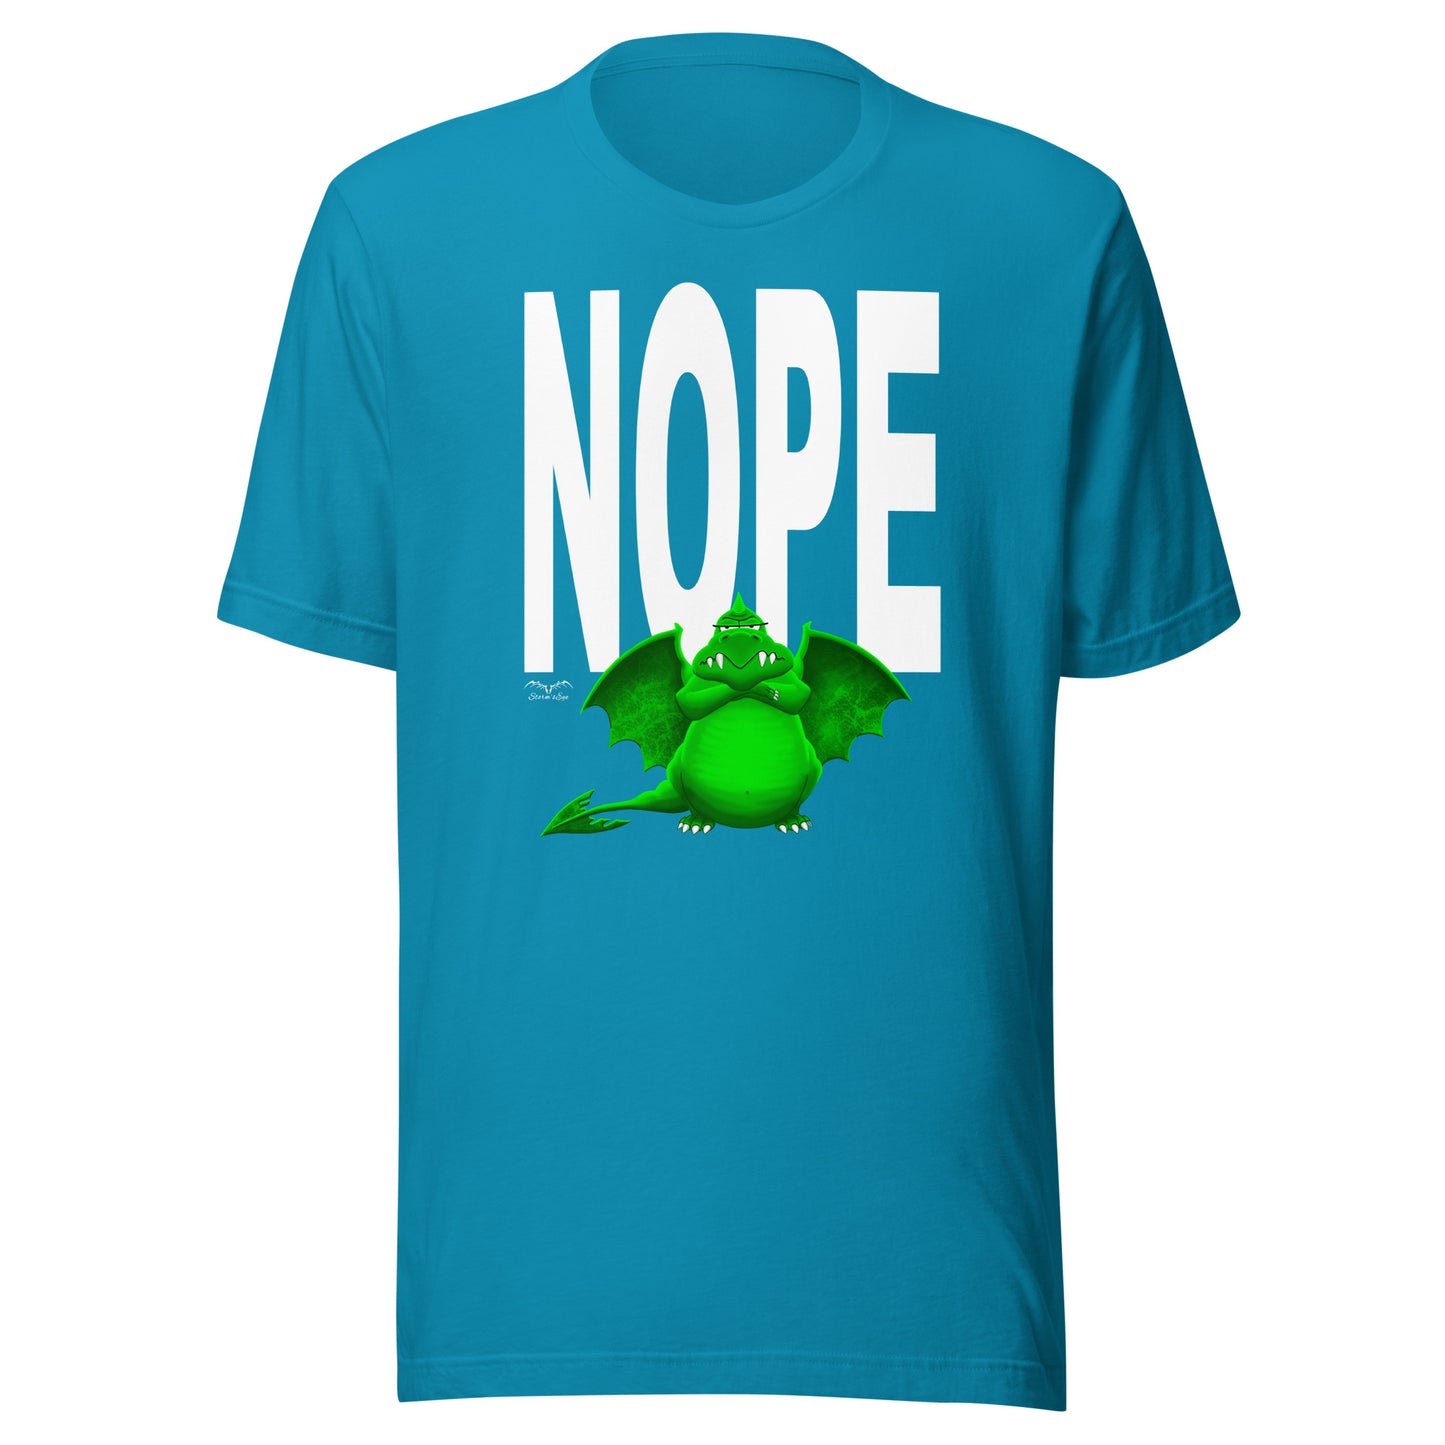 nope dragon bouncer t-shirt, bright blue, by Stormseye Design